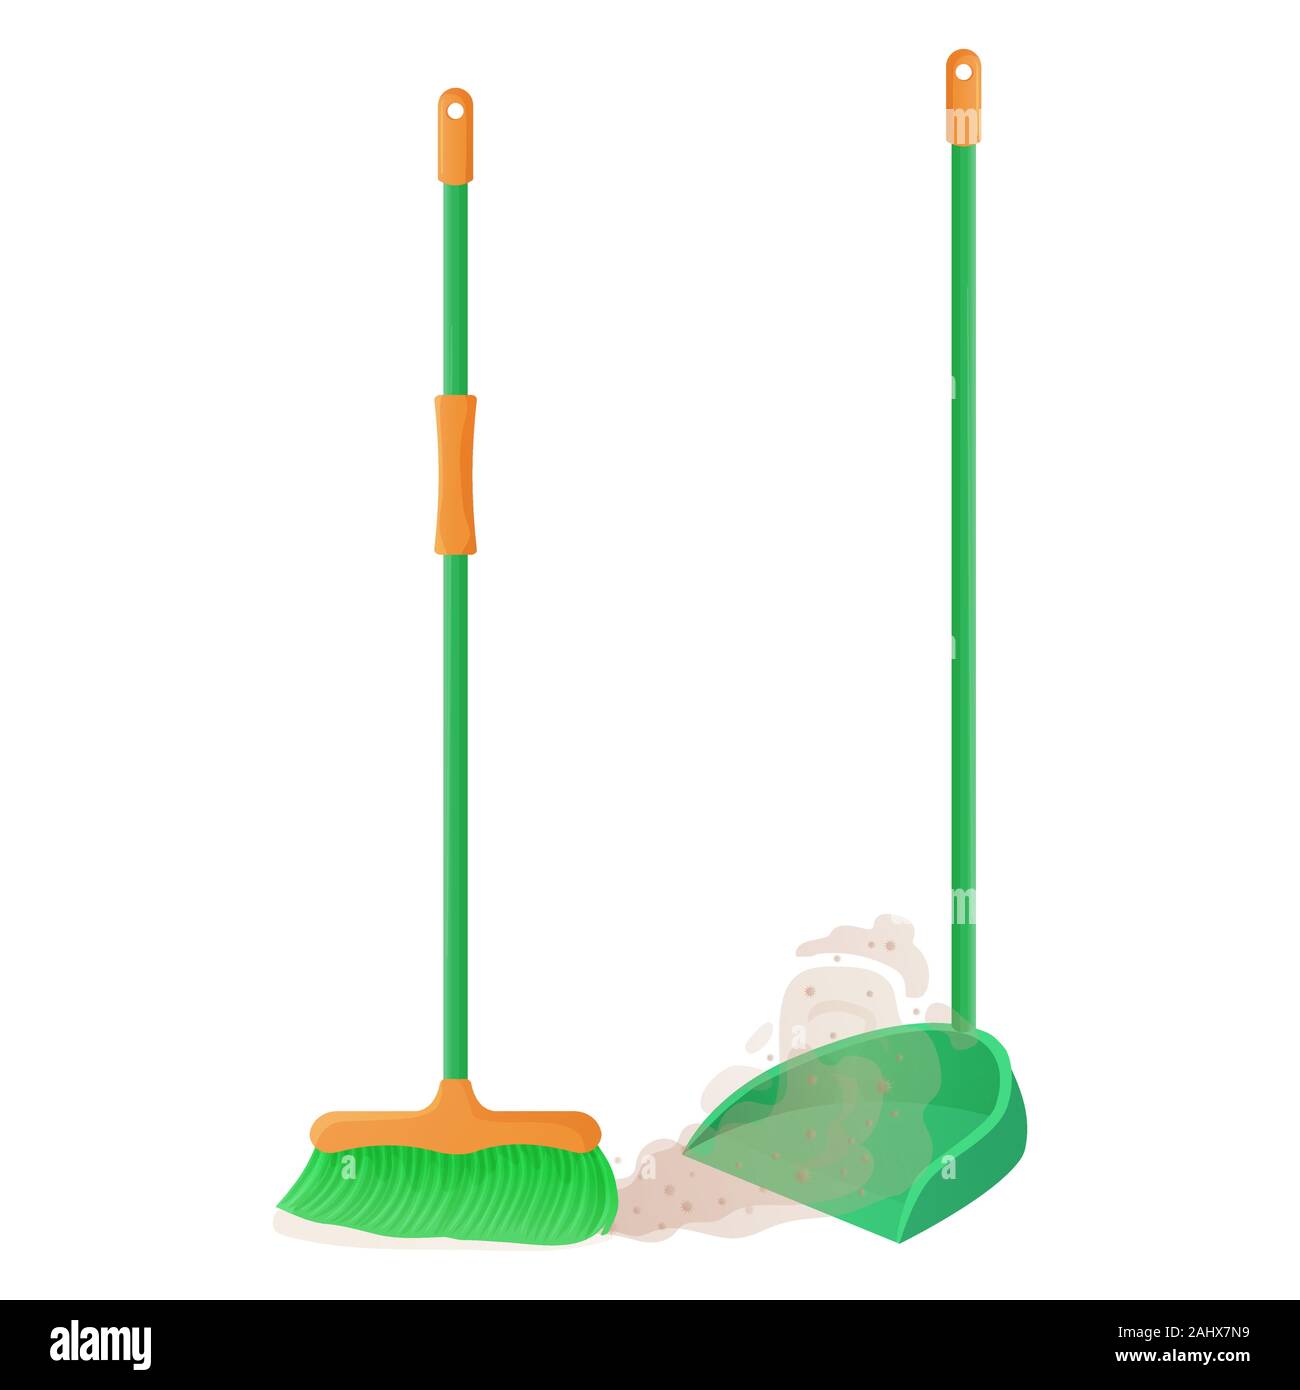 Cartoon plastic broom and scoop set. Broom sweeps dust and dirt. Housework, cleaning services, household,concept. Equipment for cleaning element Stock Vector